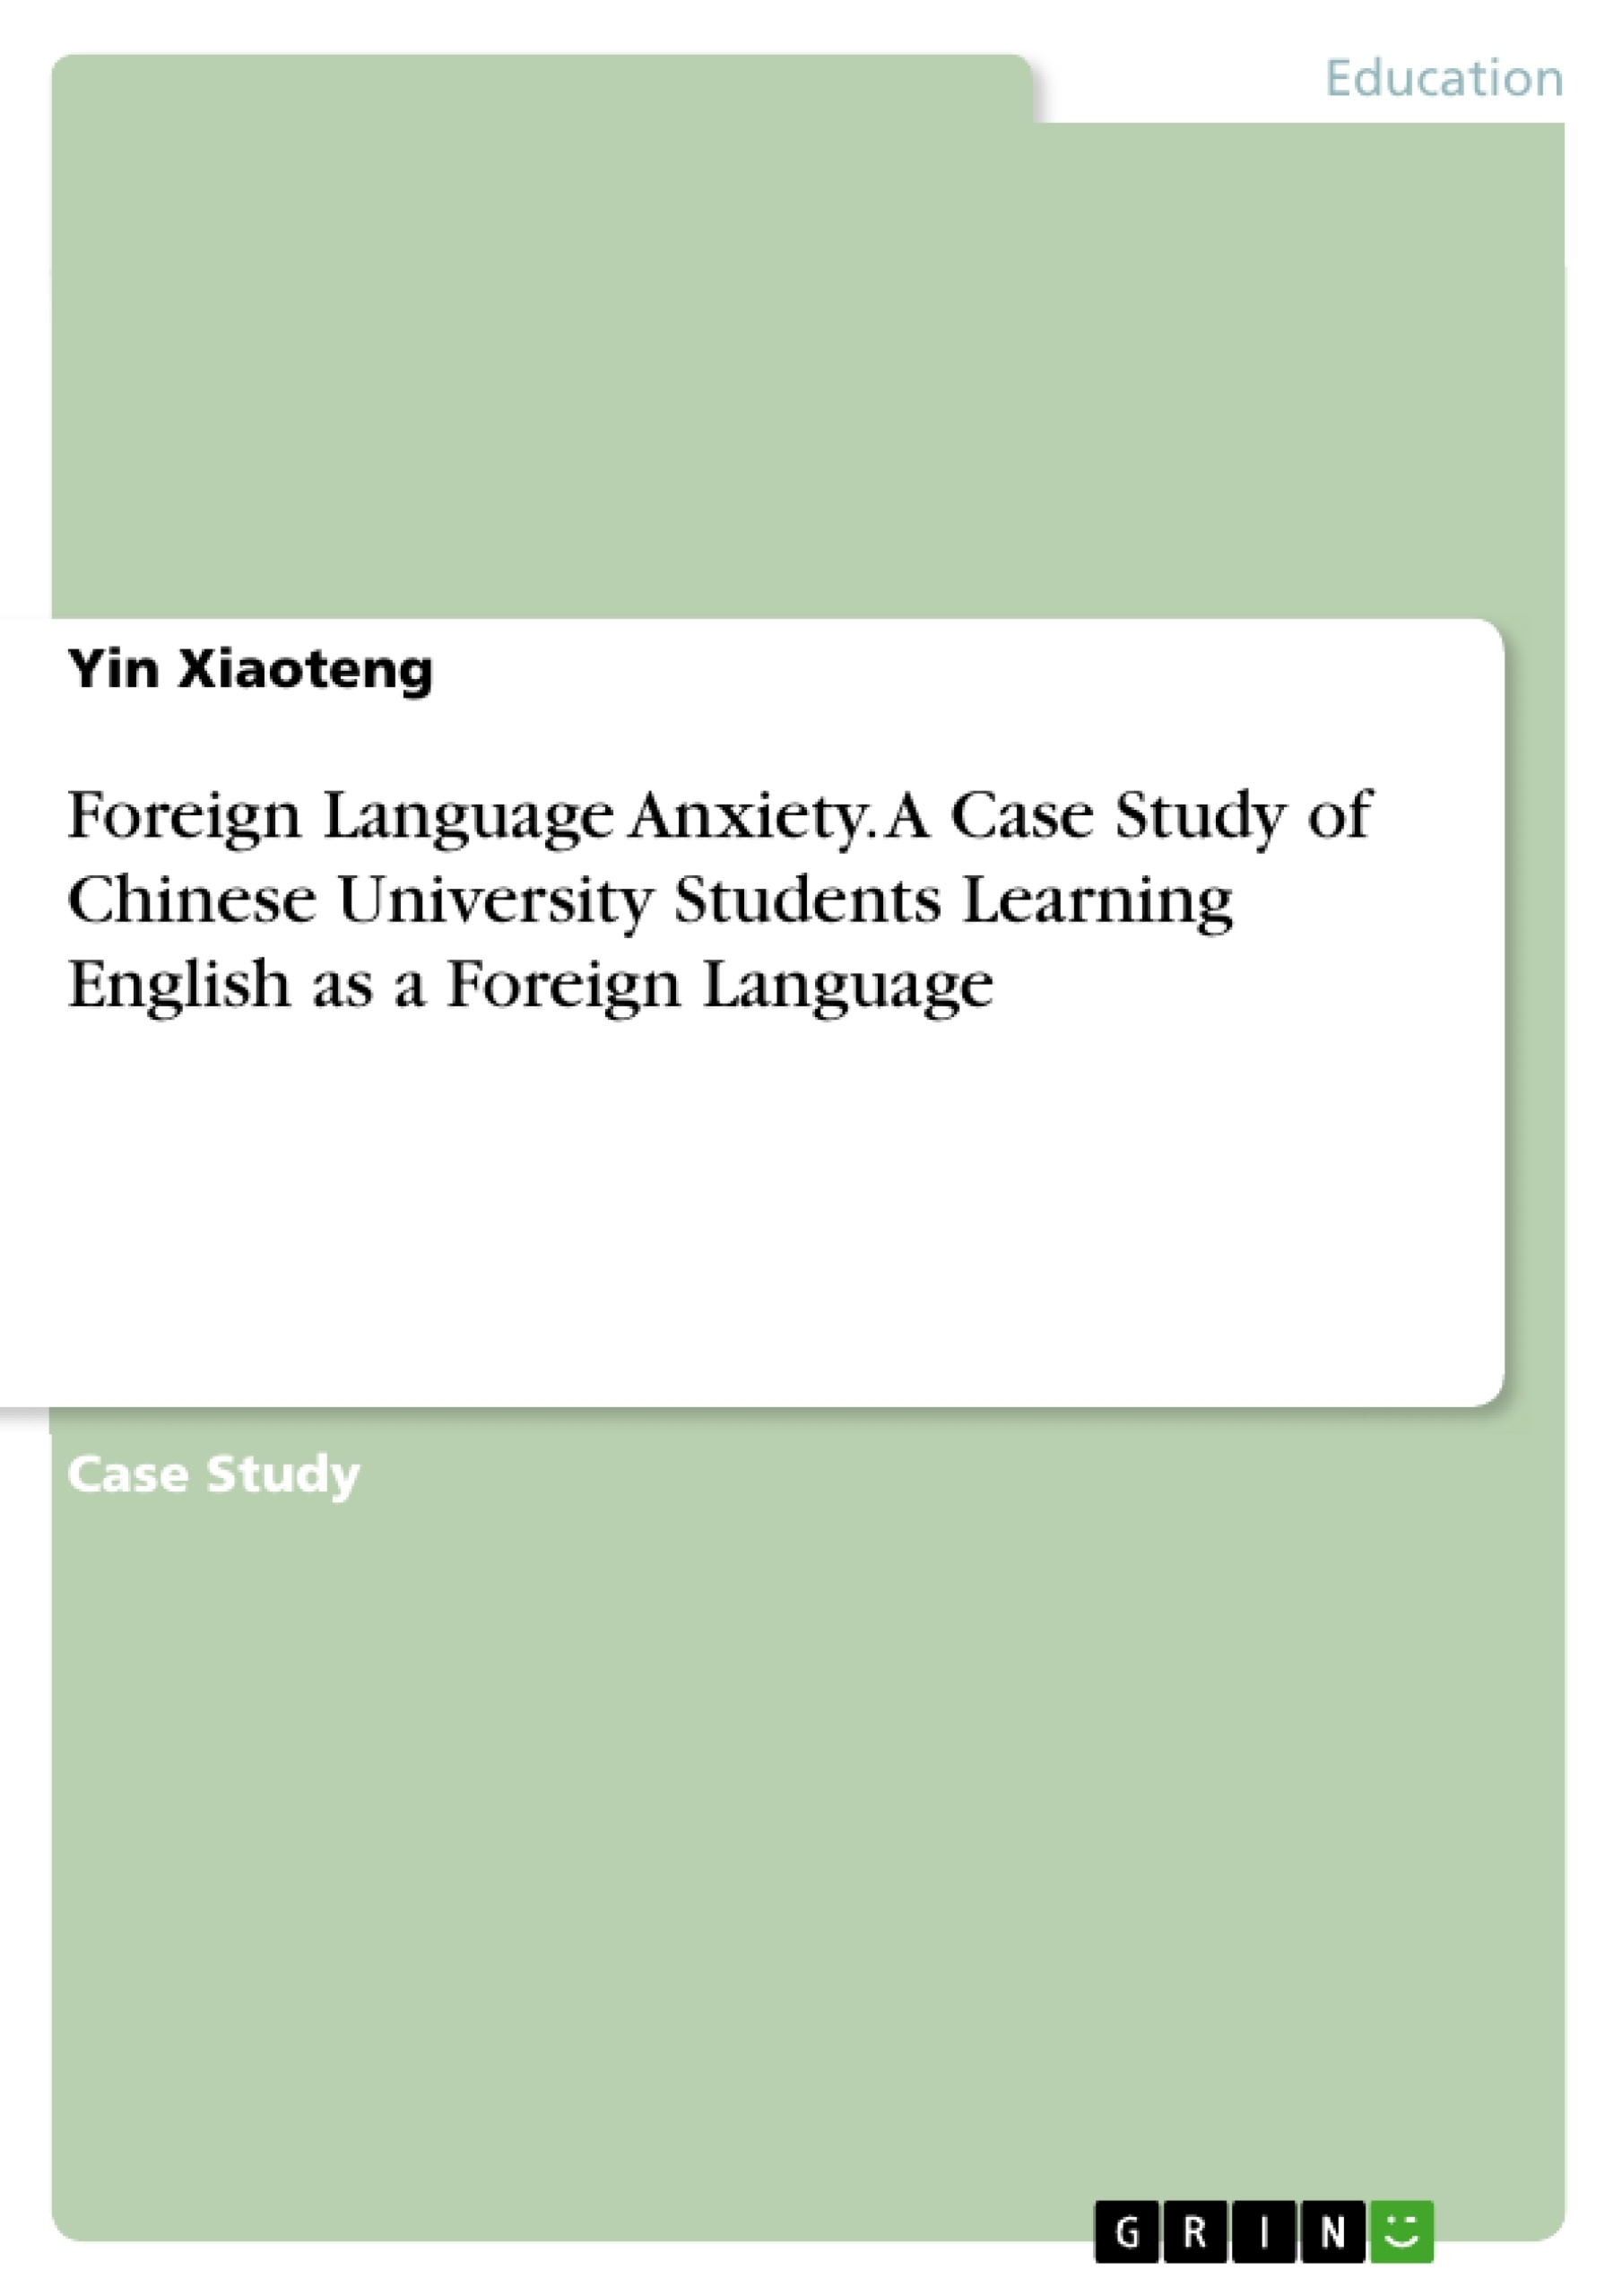 Título: Foreign Language Anxiety. A Case Study of Chinese University Students Learning English as a Foreign Language